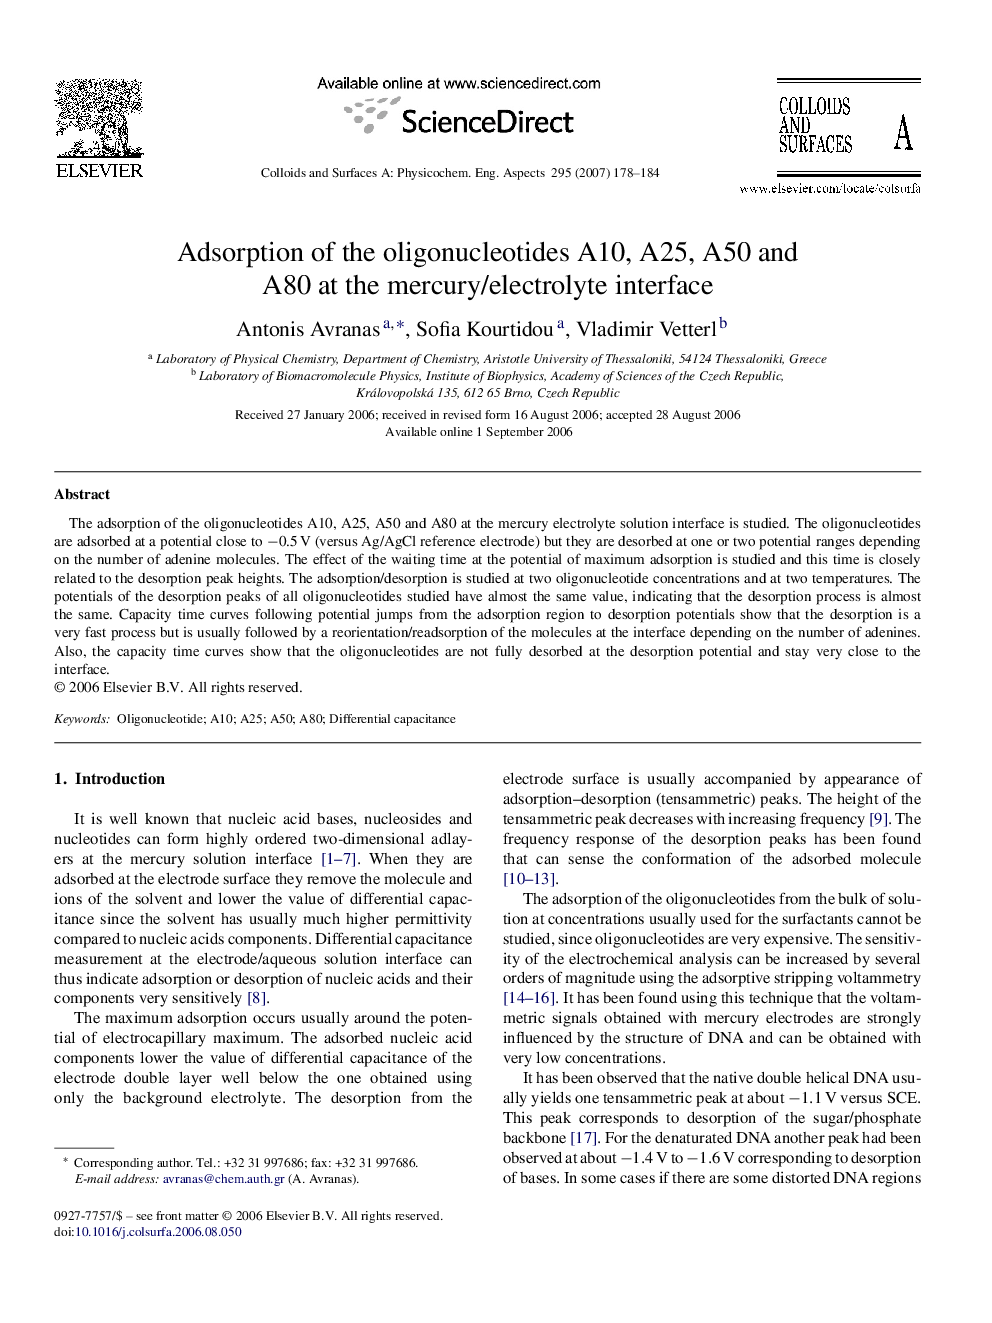 Adsorption of the oligonucleotides A10, A25, A50 and A80 at the mercury/electrolyte interface